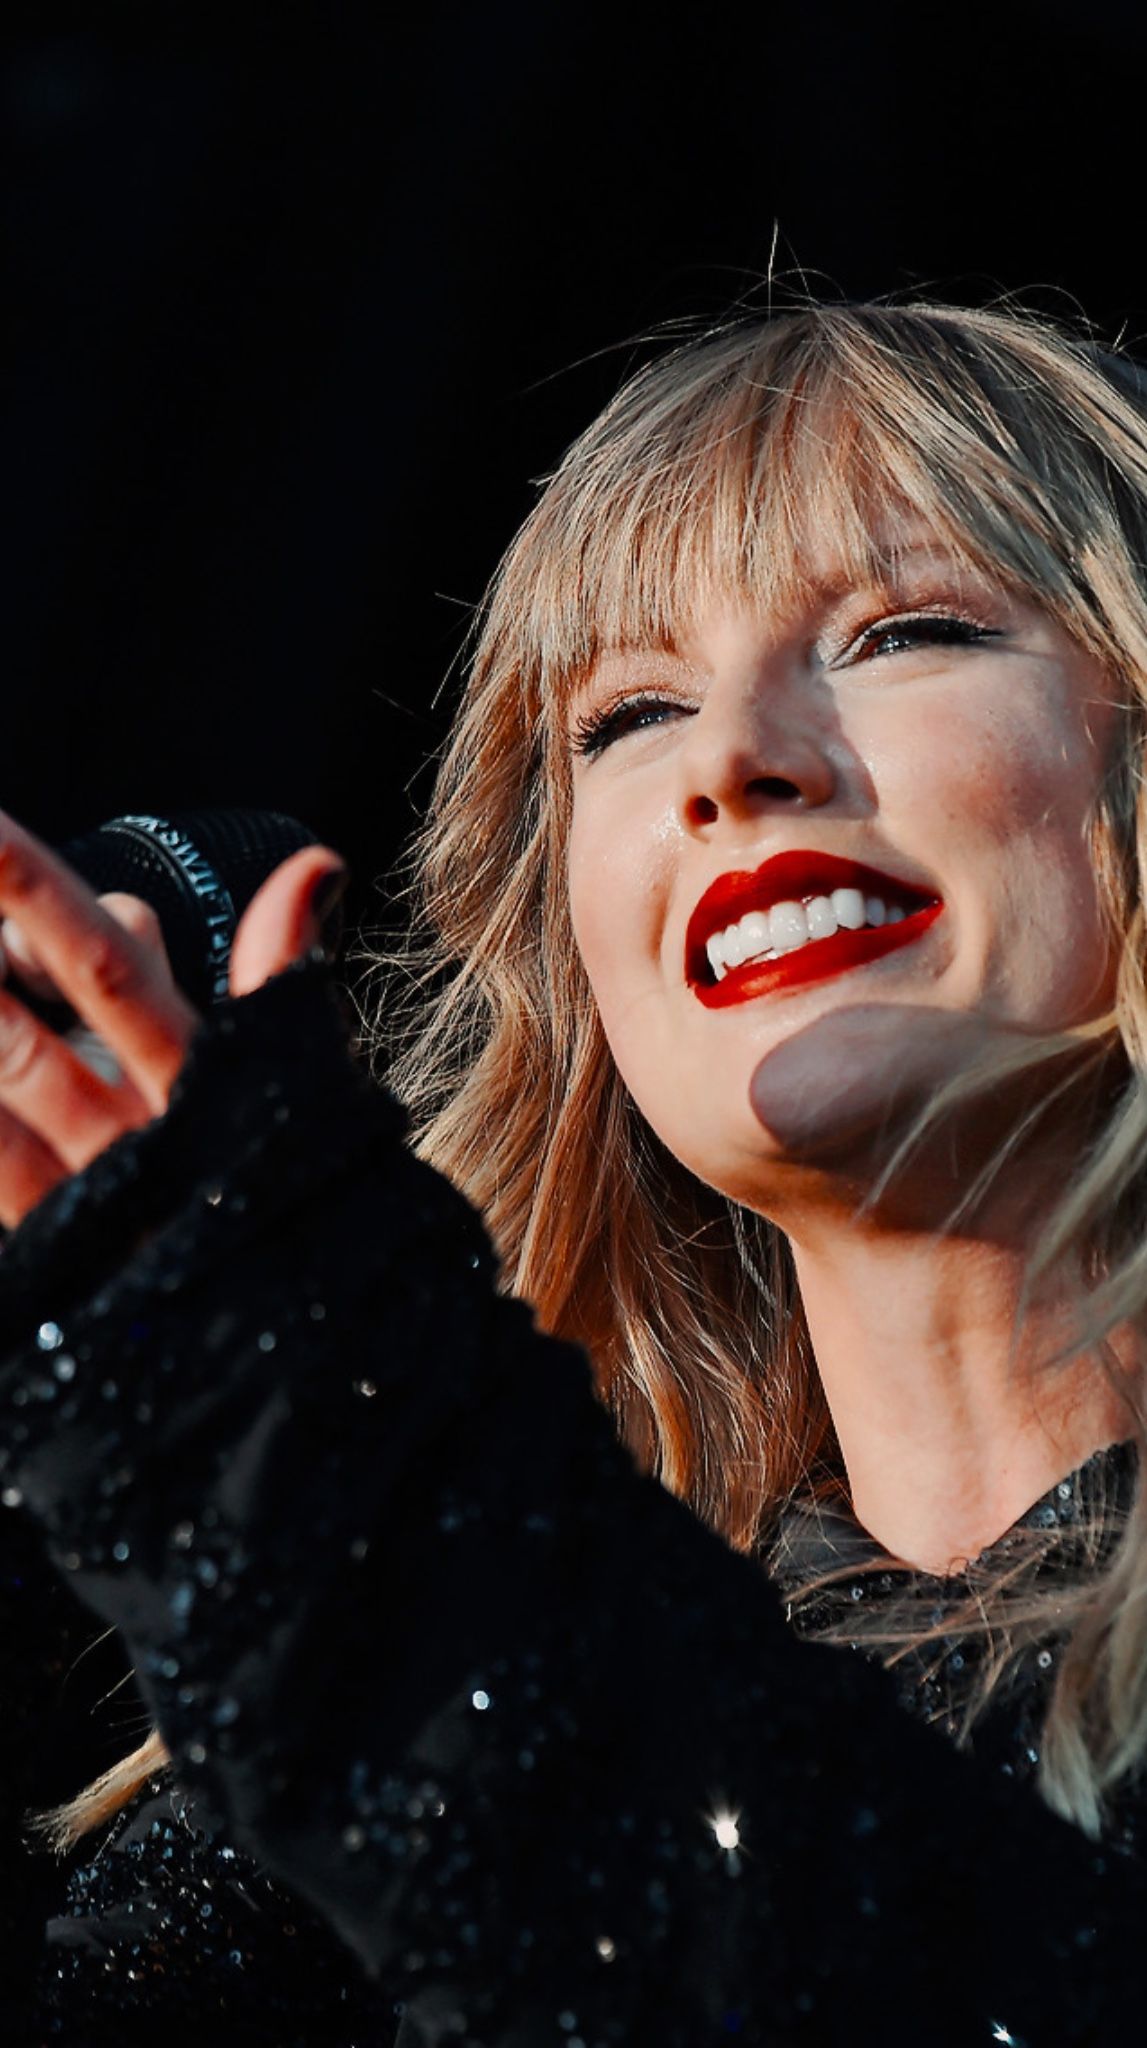 Follow me (dipasha dev) for more pins of Taylor Swift. Taylor swift smile, Taylor swift concert, Taylor swift picture